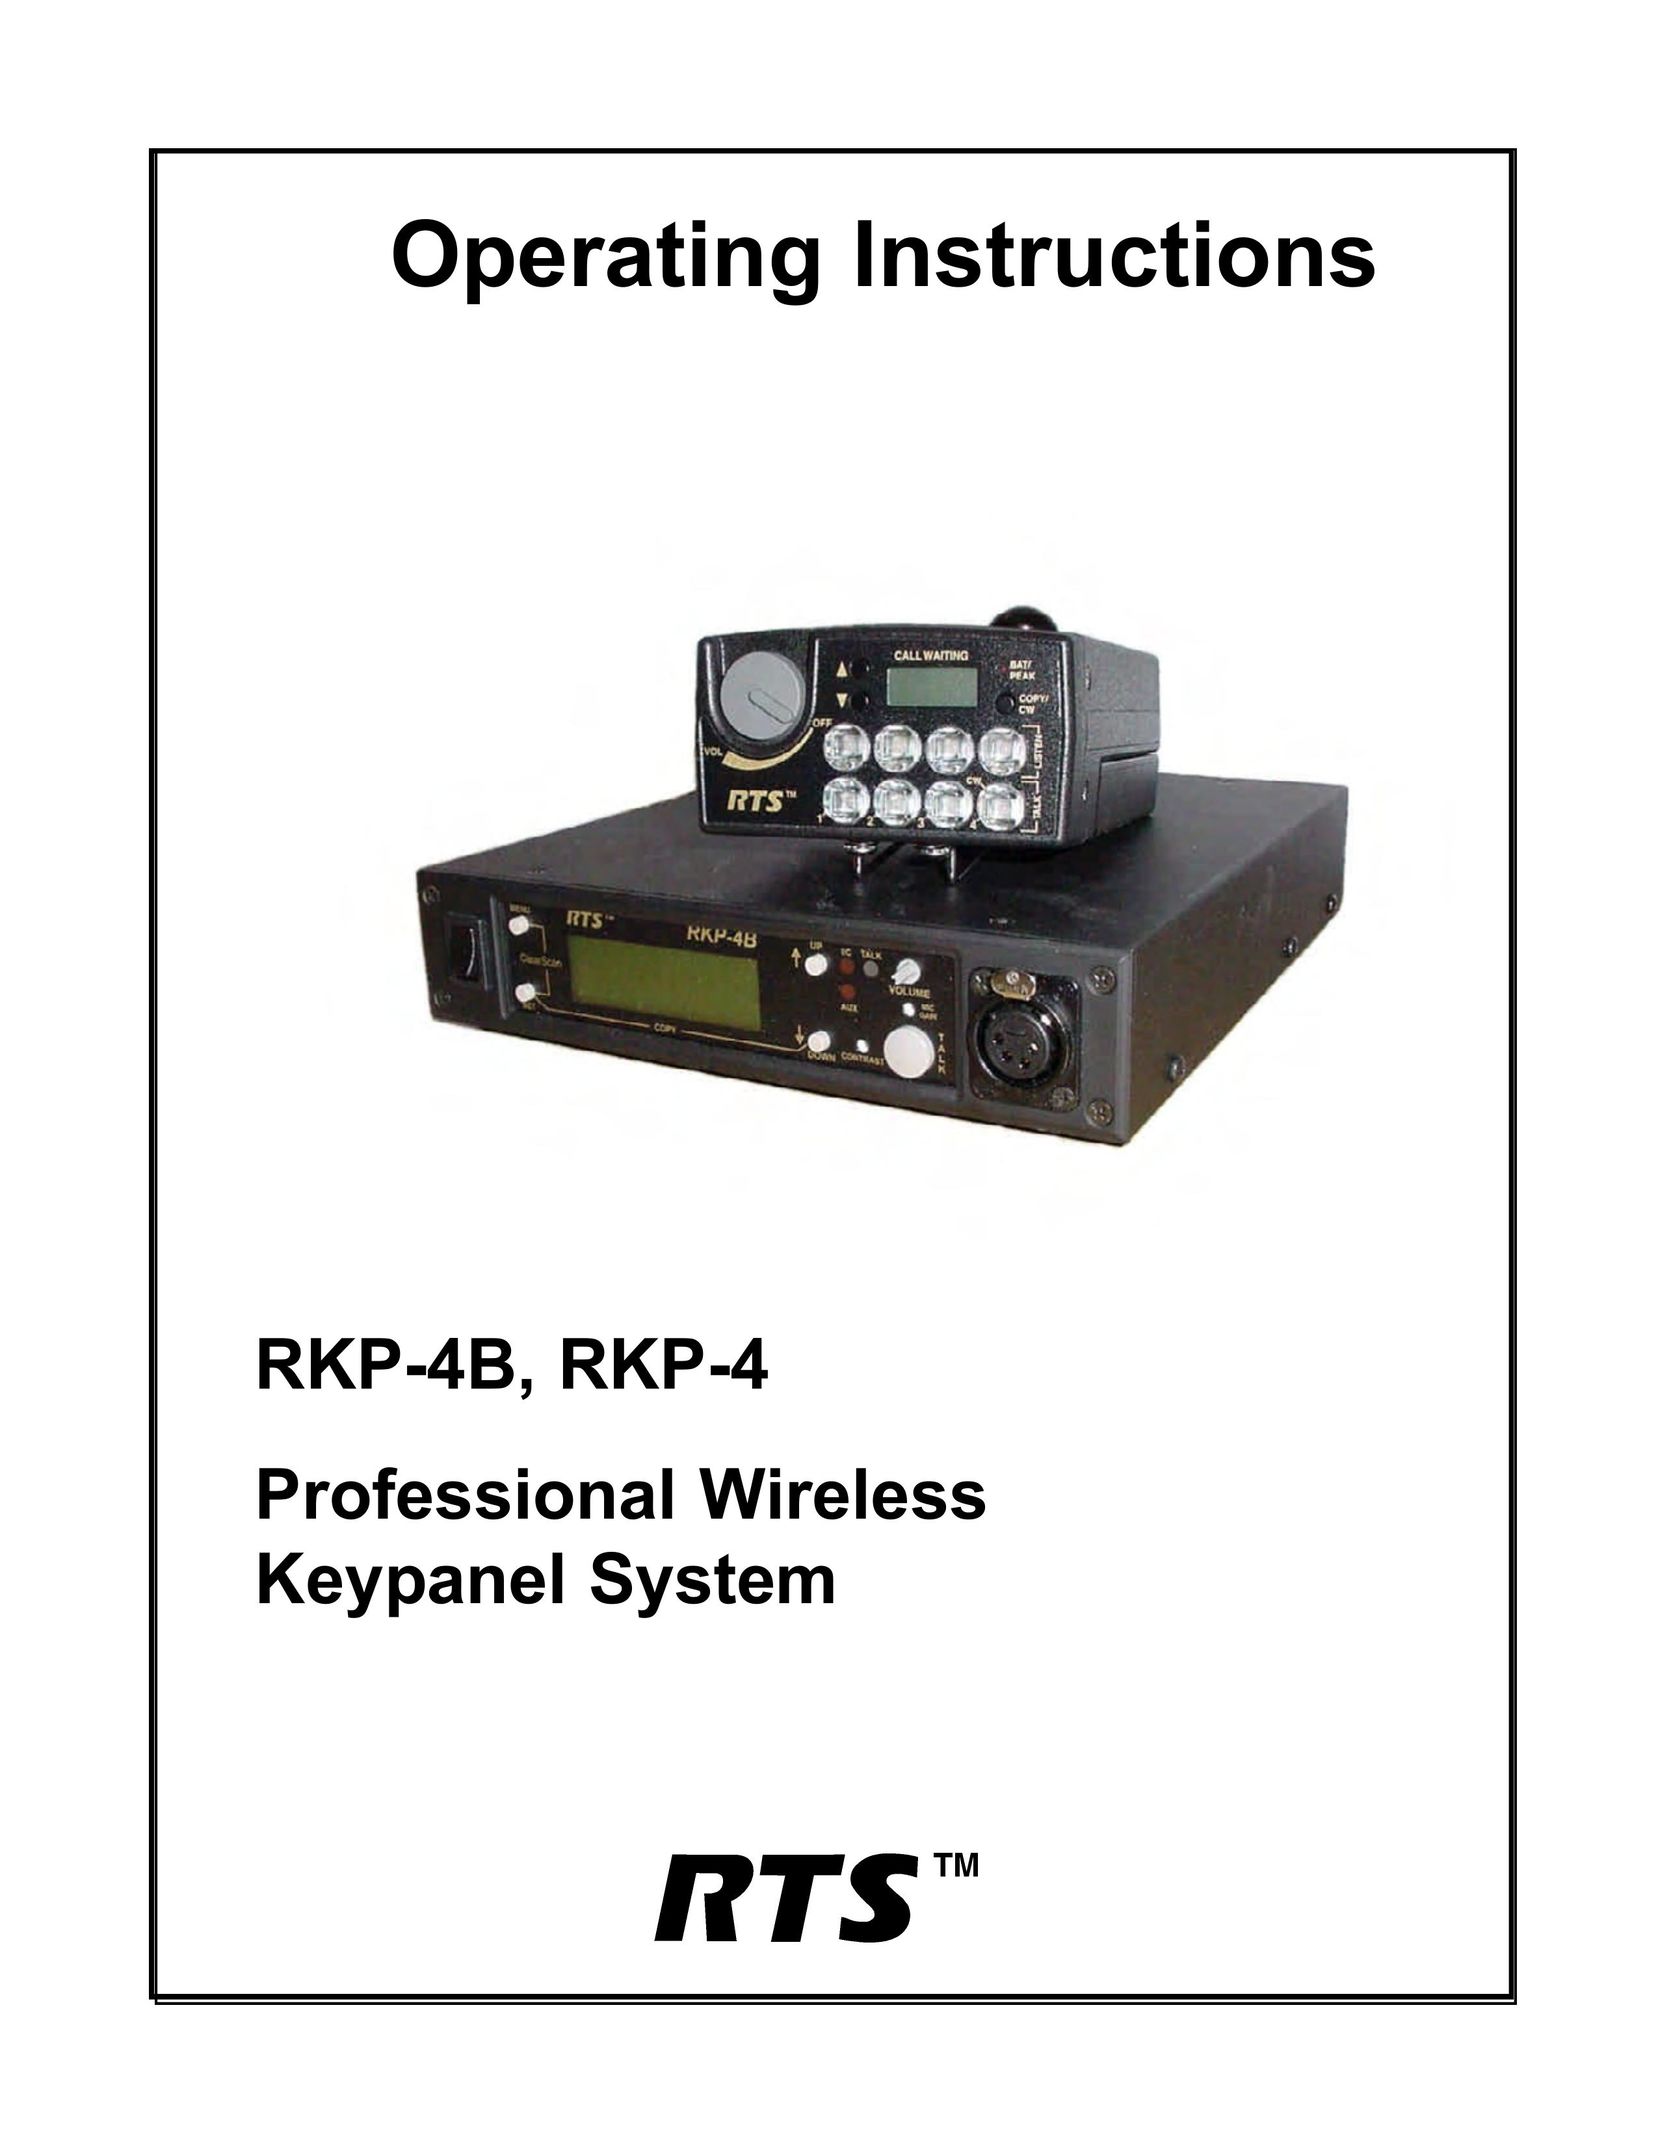 RTS RKP-4 Stereo Receiver User Manual